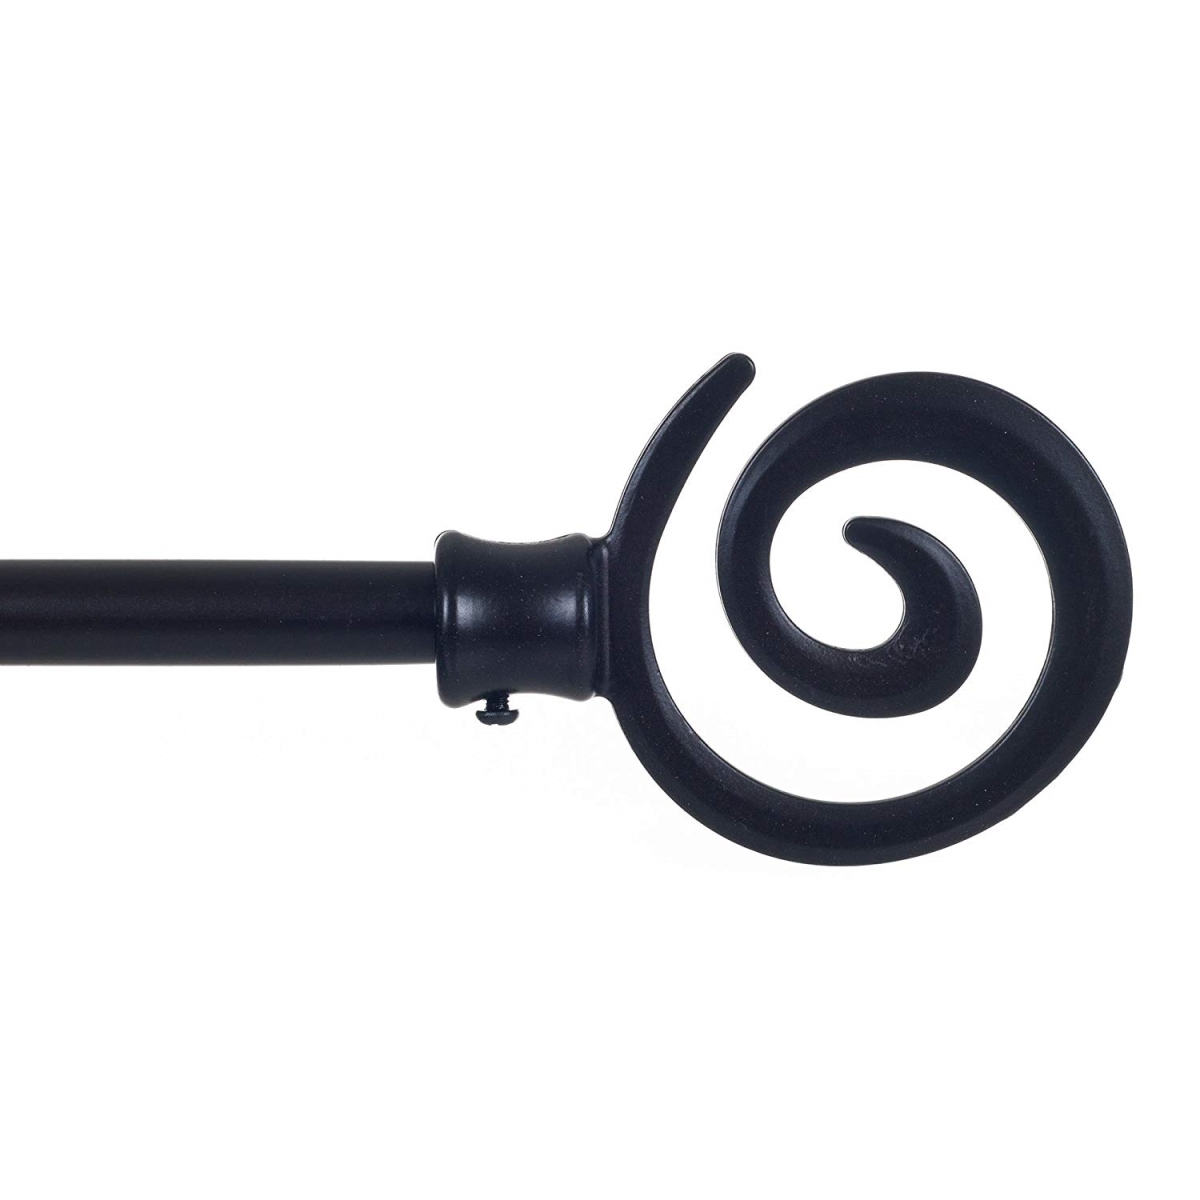 63a-06615 Spiral Curtain Rod, Rubbed Bronze - 0.75 In.